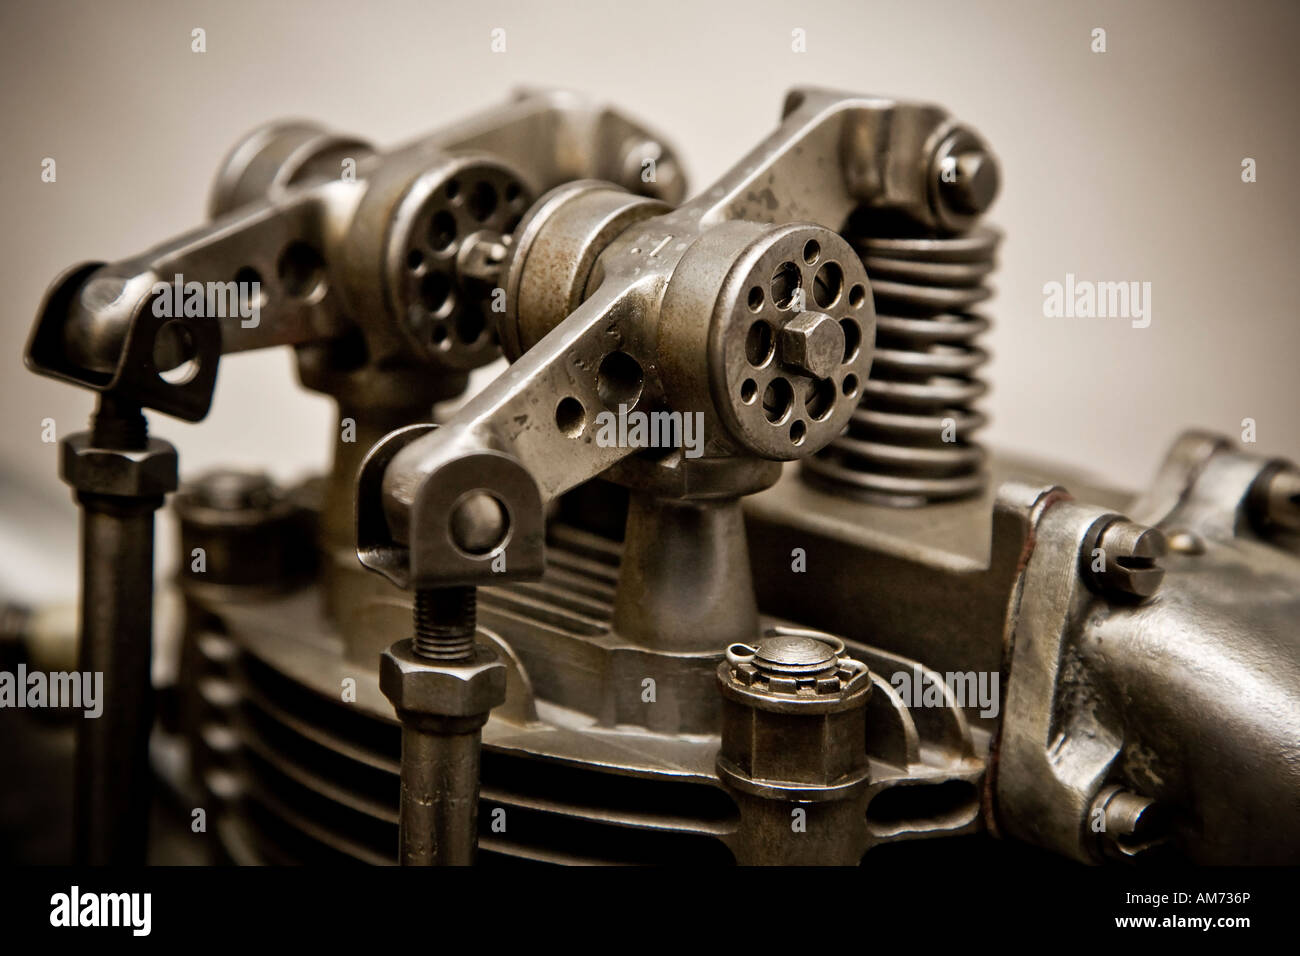 The radial engine close up Stock Photo